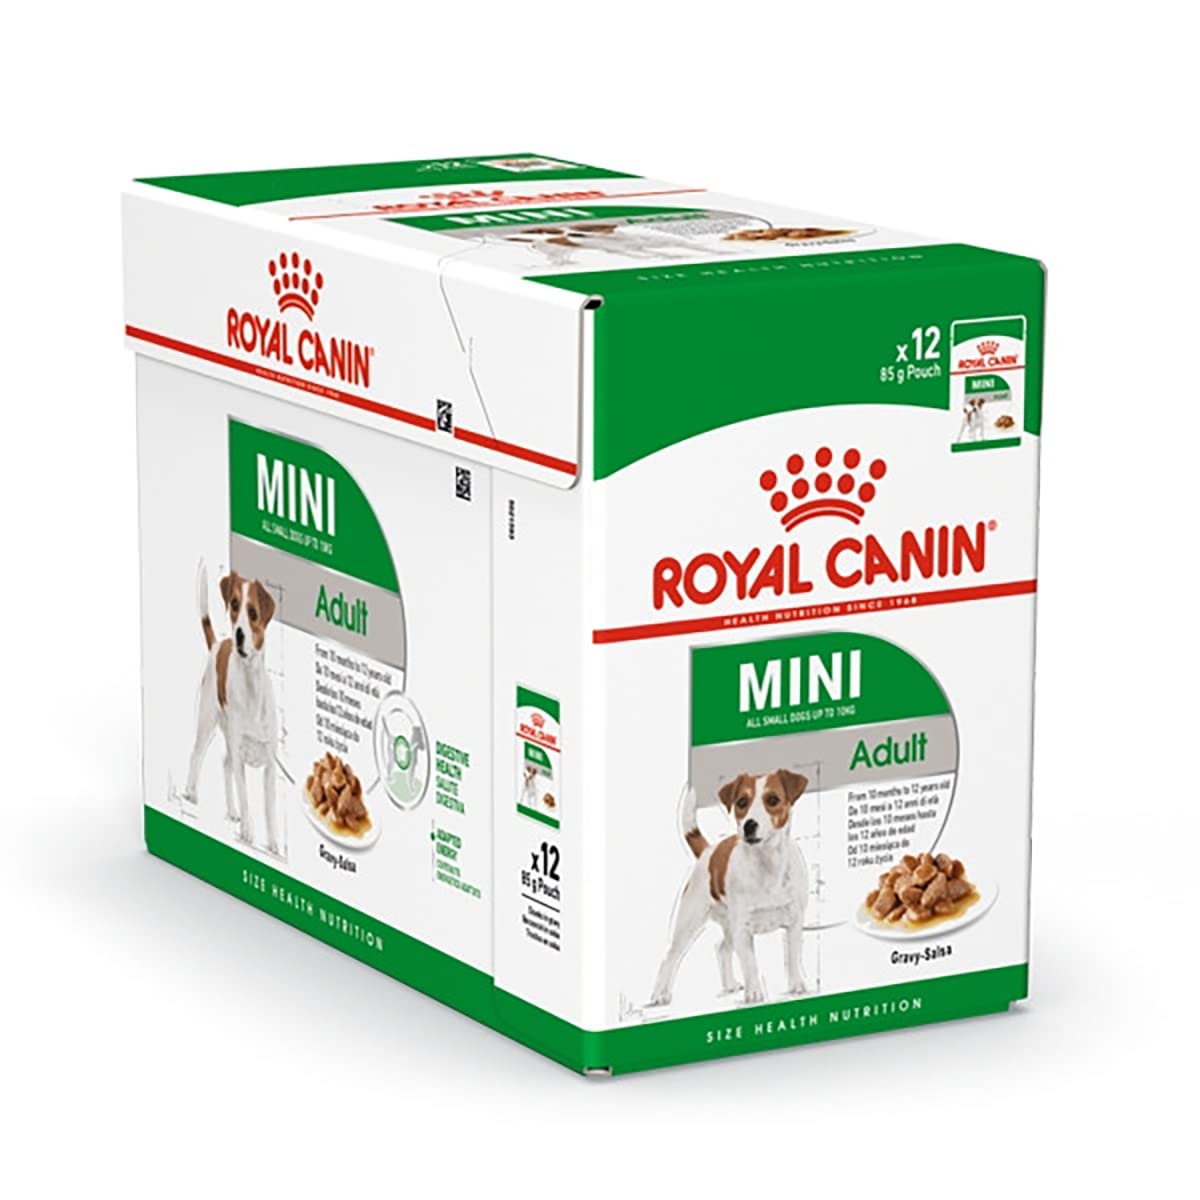 Royal Canin Mini Gravy Adult Dog Food, Meat Flavor, Pouch (Pack of 12)